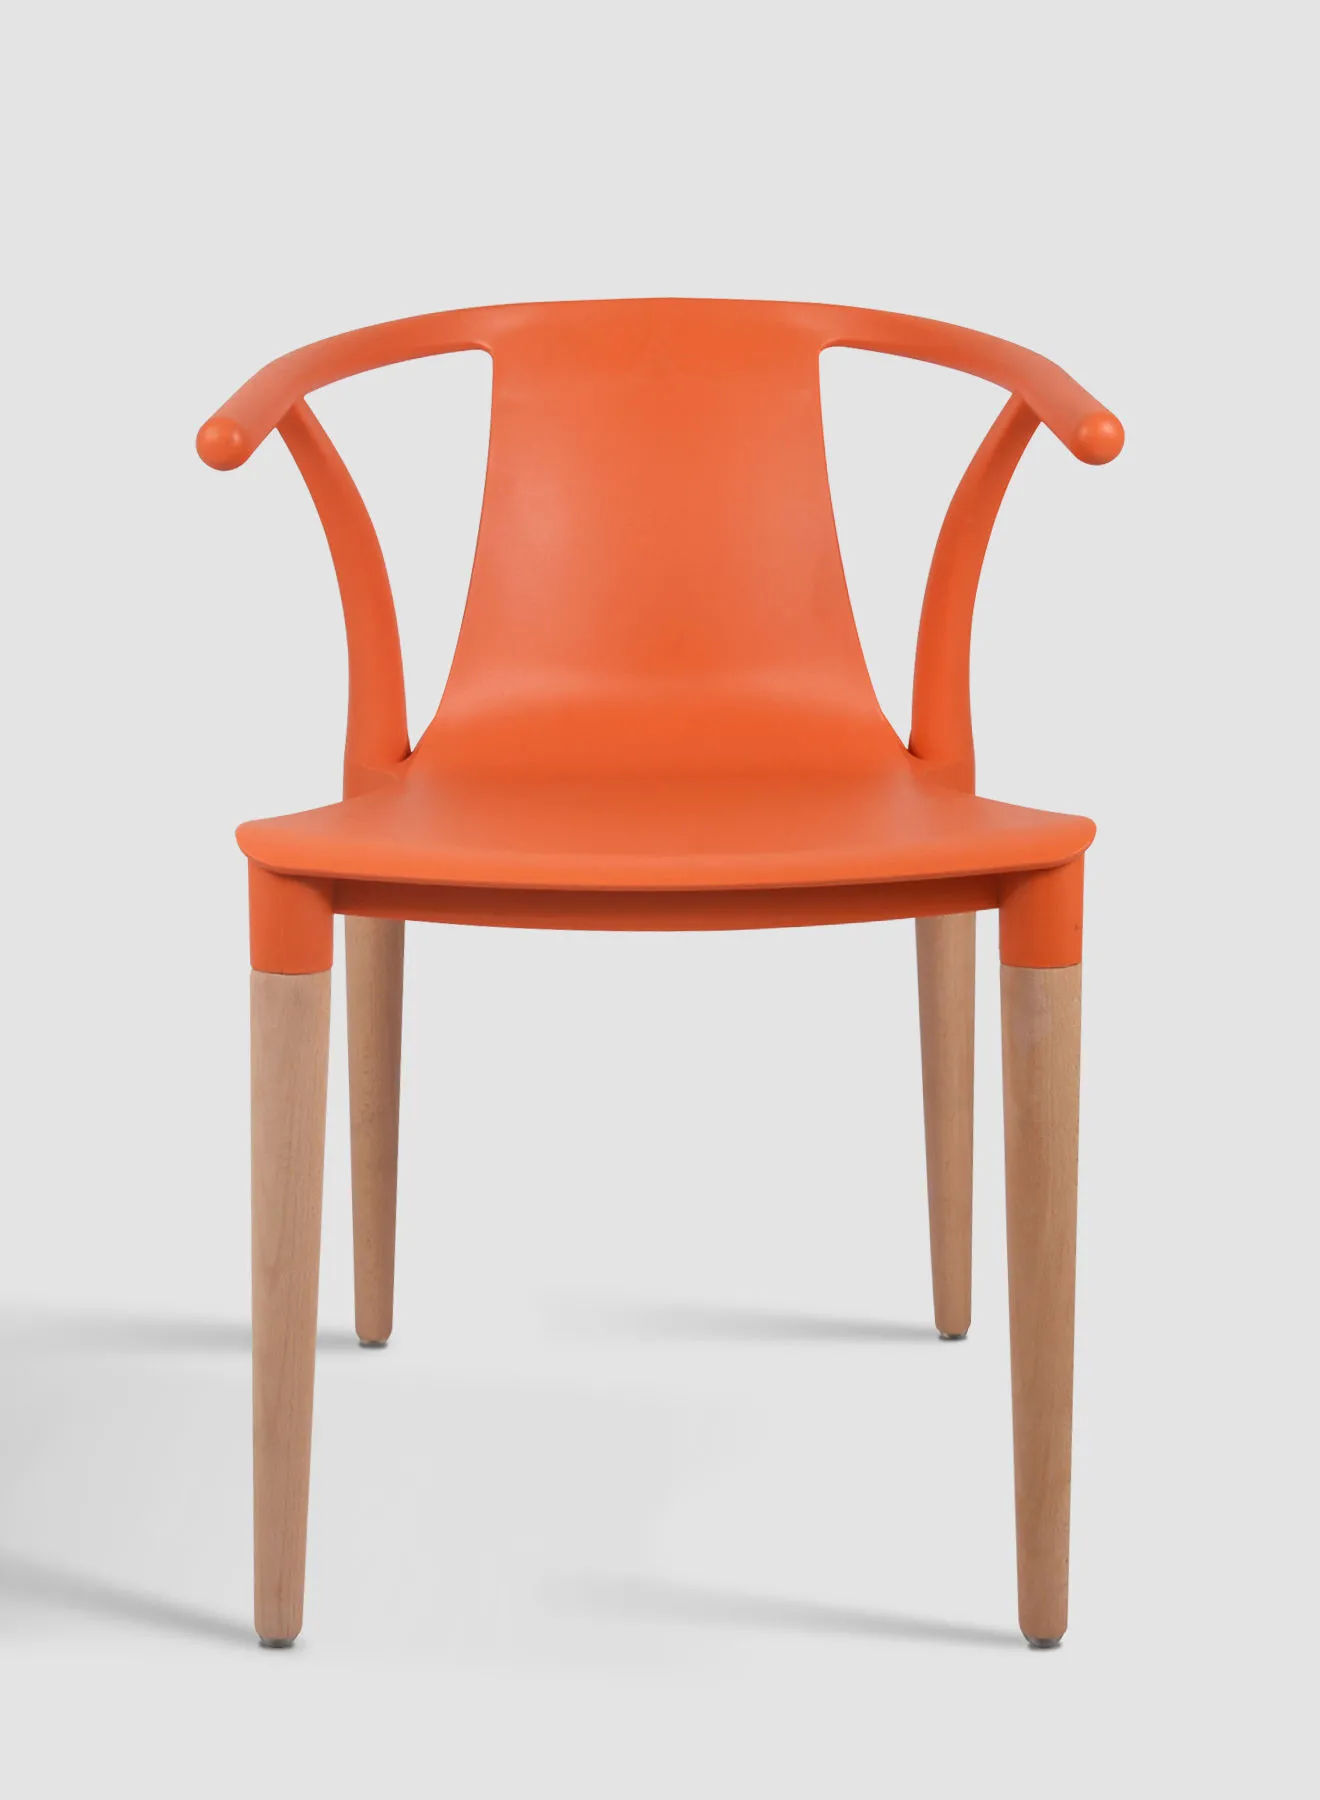 Switch Dining Chair In Orange Plastic Chair Size 55.6 X 56 X 76.2